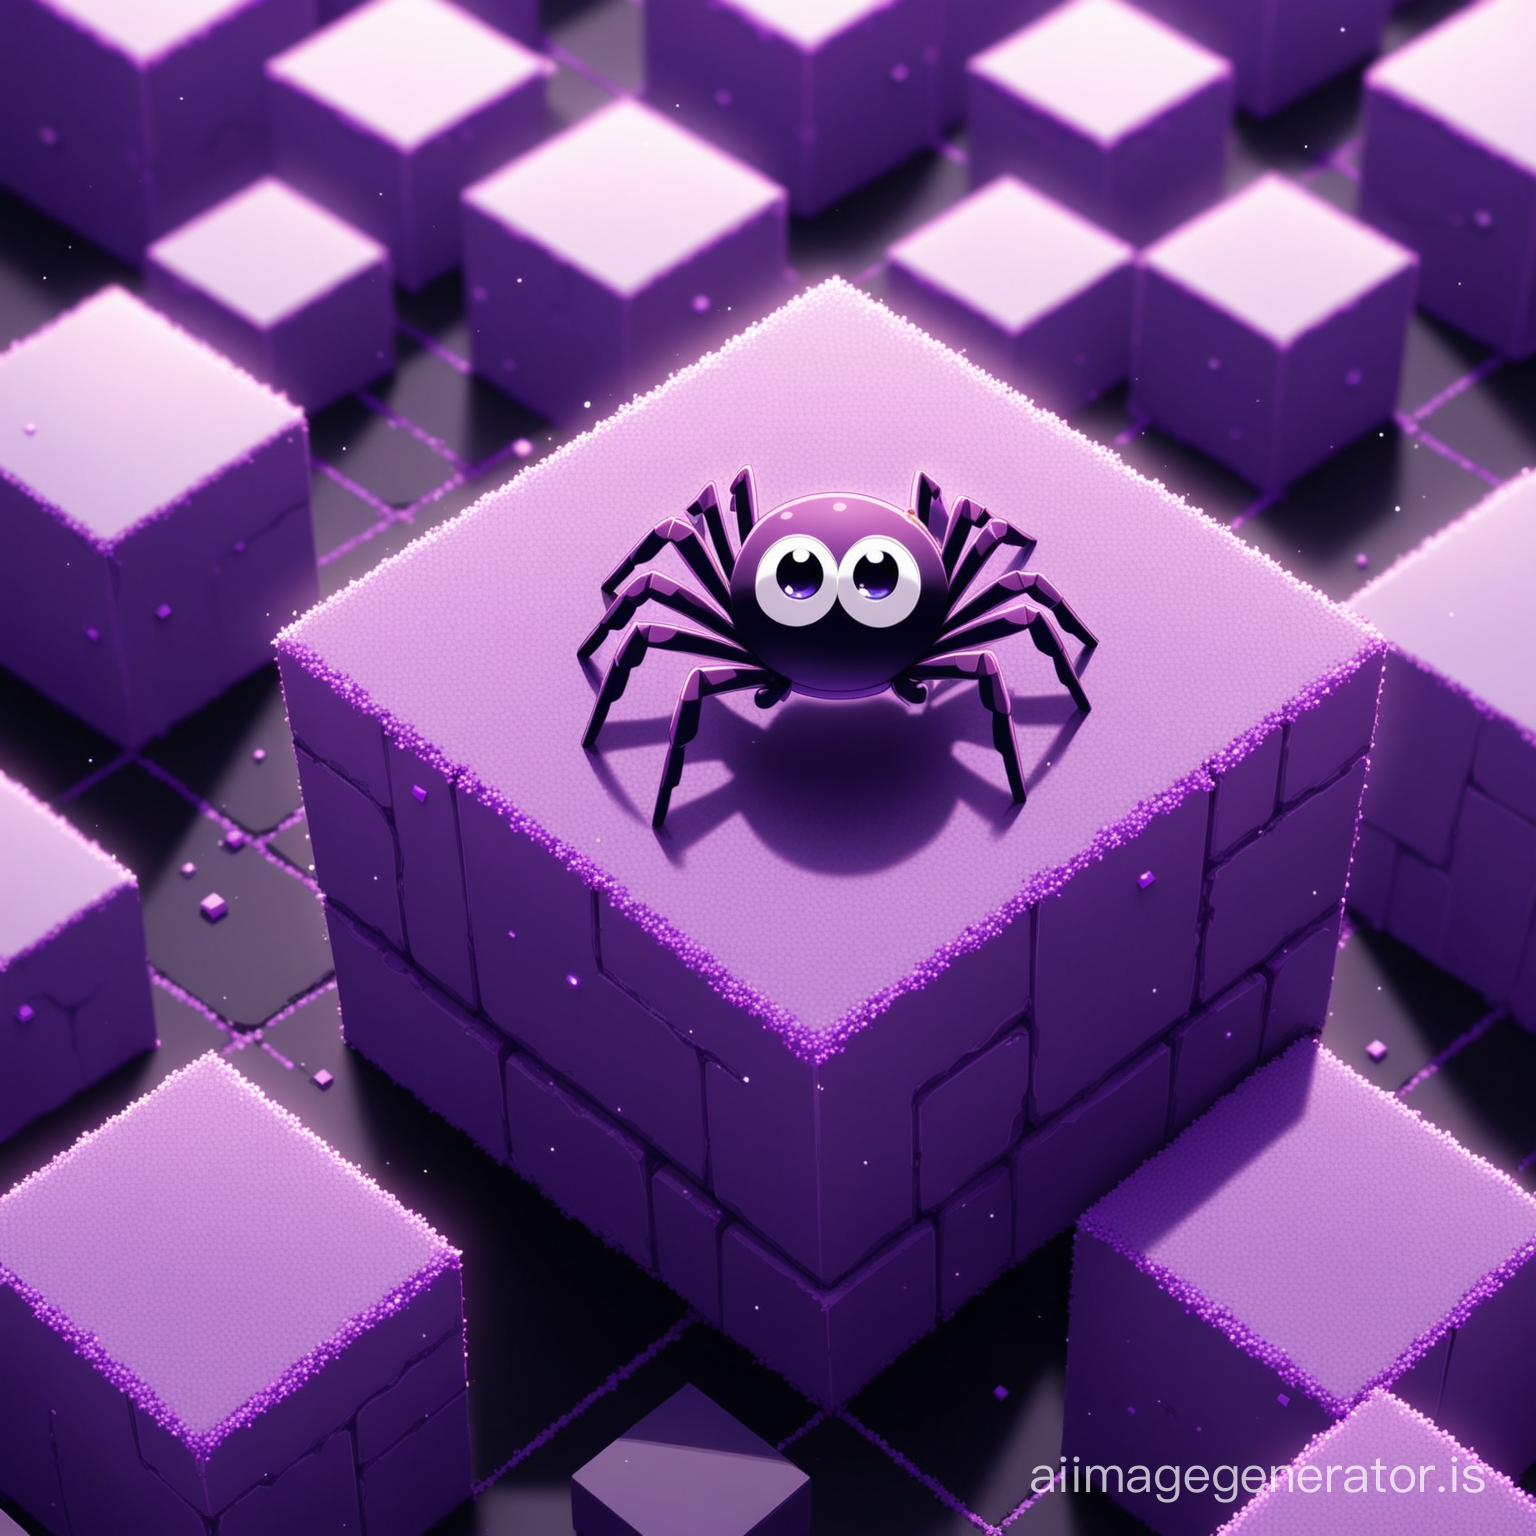 A little cute spider flying on the purple block earth with super detail and High Quality
big and Purple and floating blocks are seen everywhere
Details are evident beautifully and with great precision